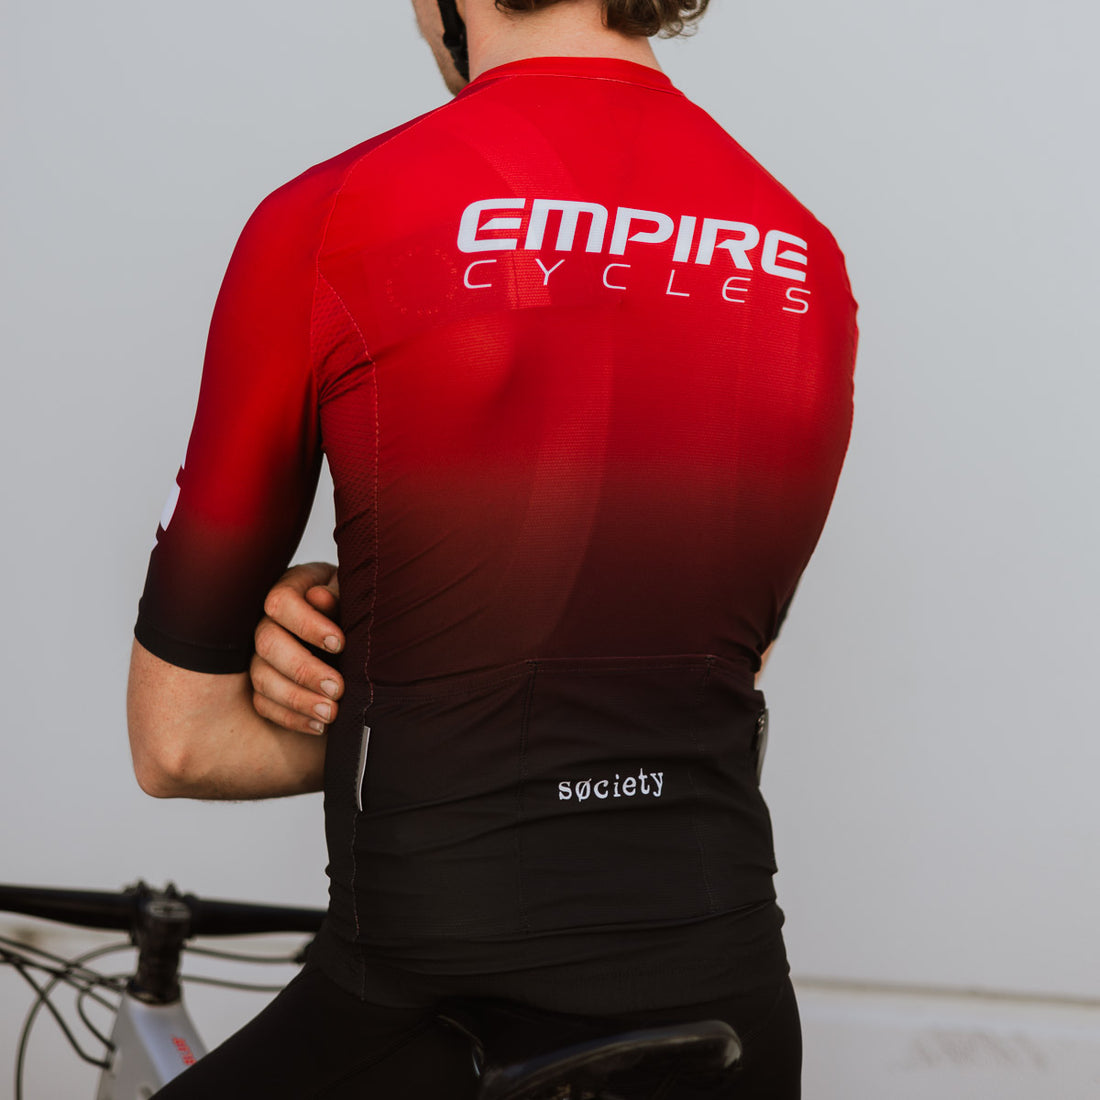 Empire Cycles x Society Cycling Jersey